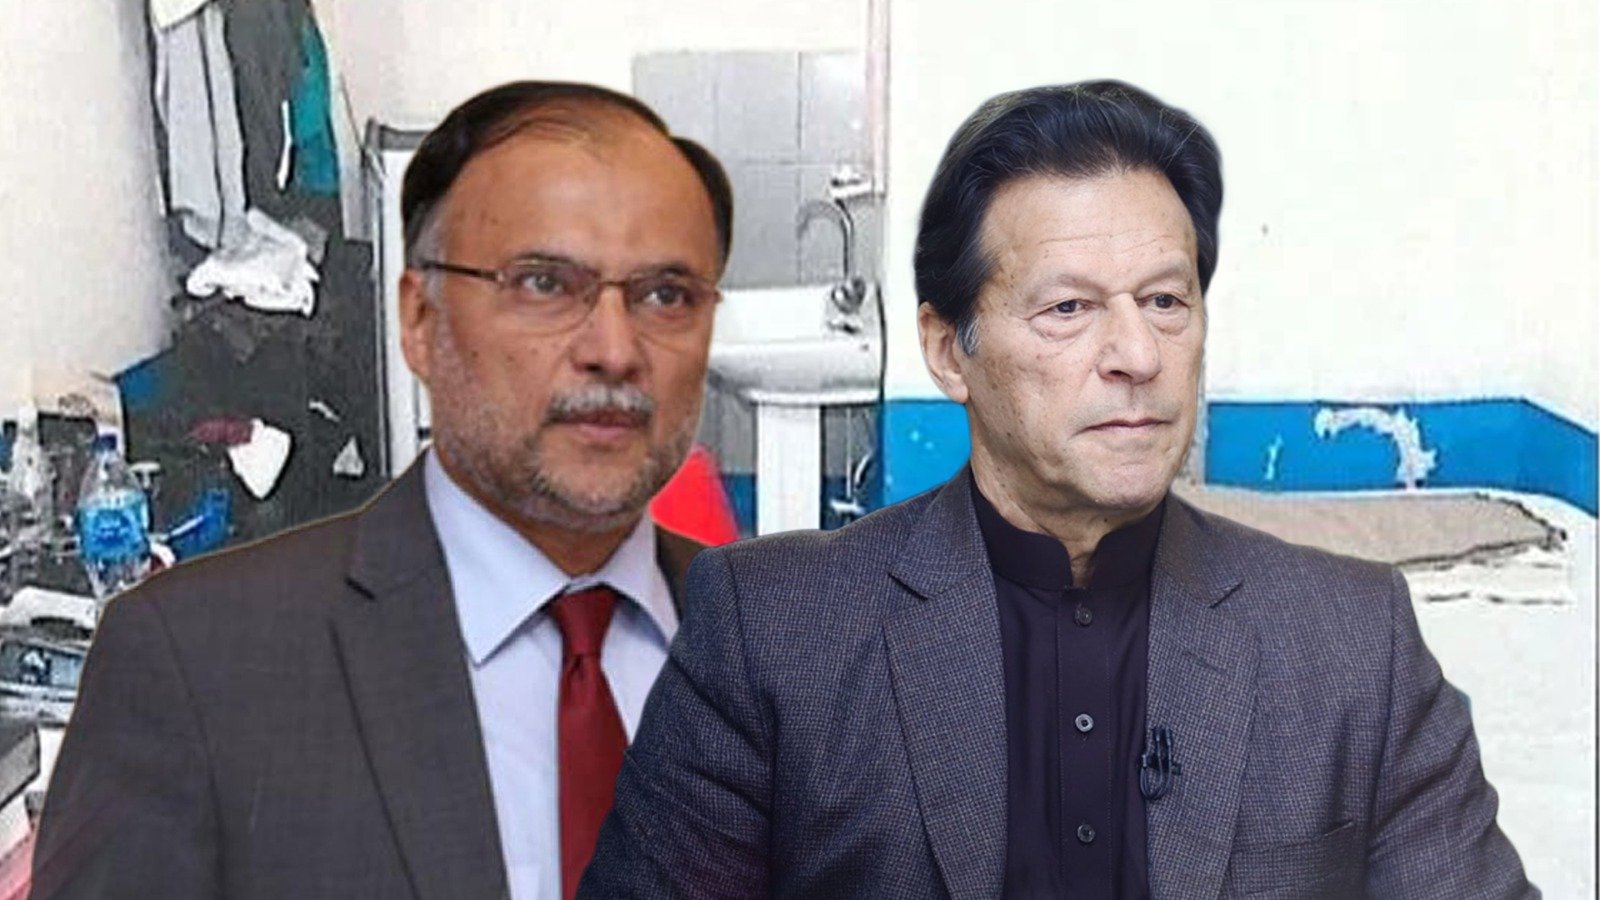 PML-N’s Ahsan Iqbal was once imprisoned in same jail cell as Imran Khan